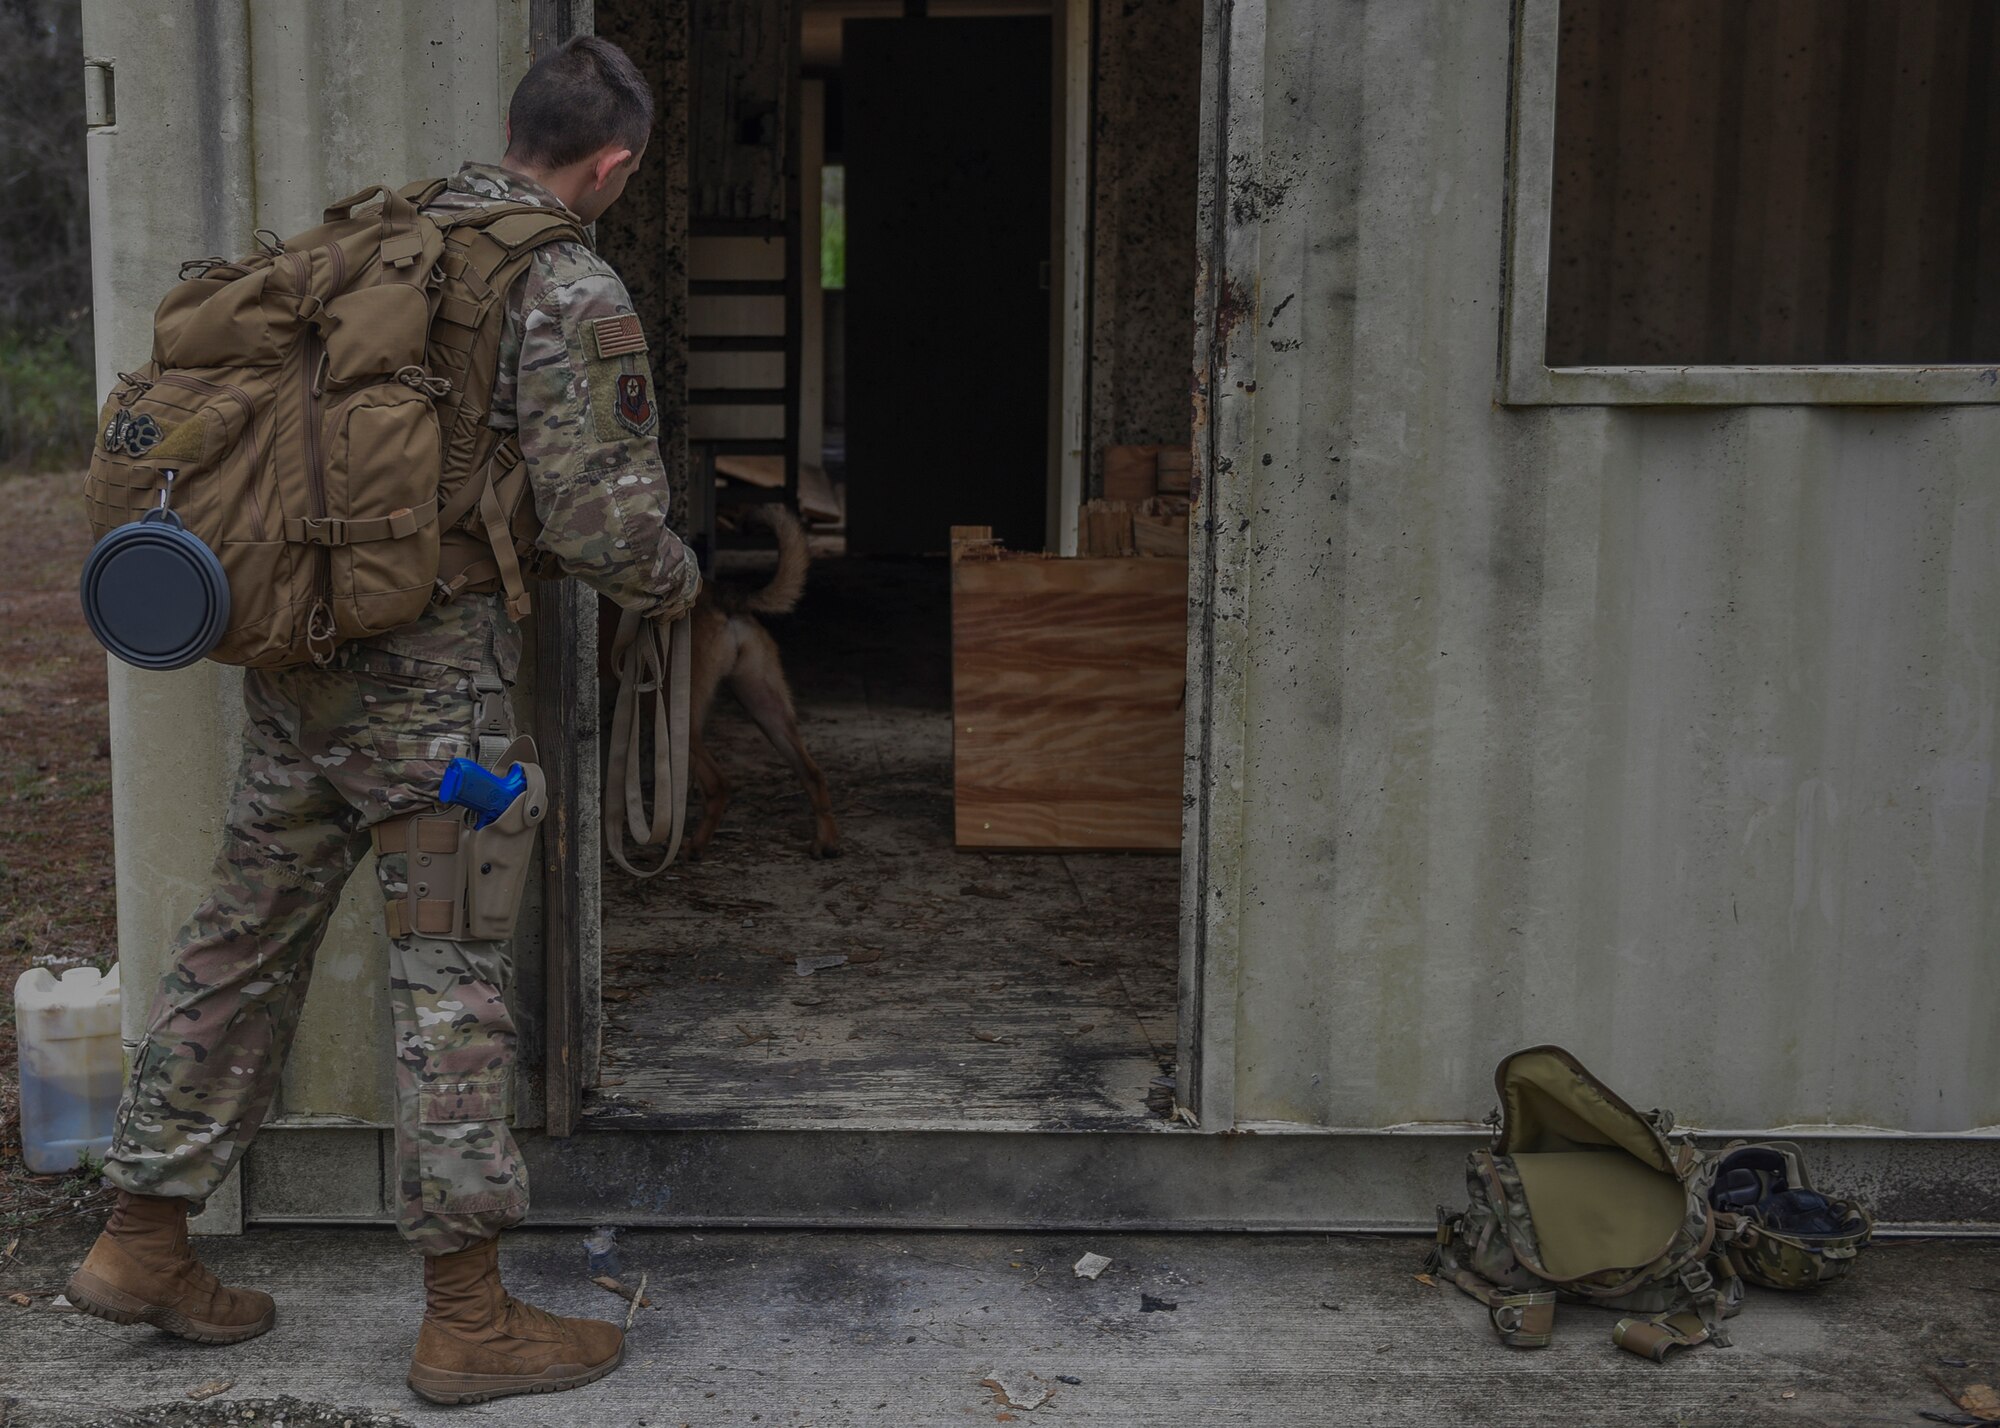 Security Forces Airman checkouts the inside of a bulding from the doorway